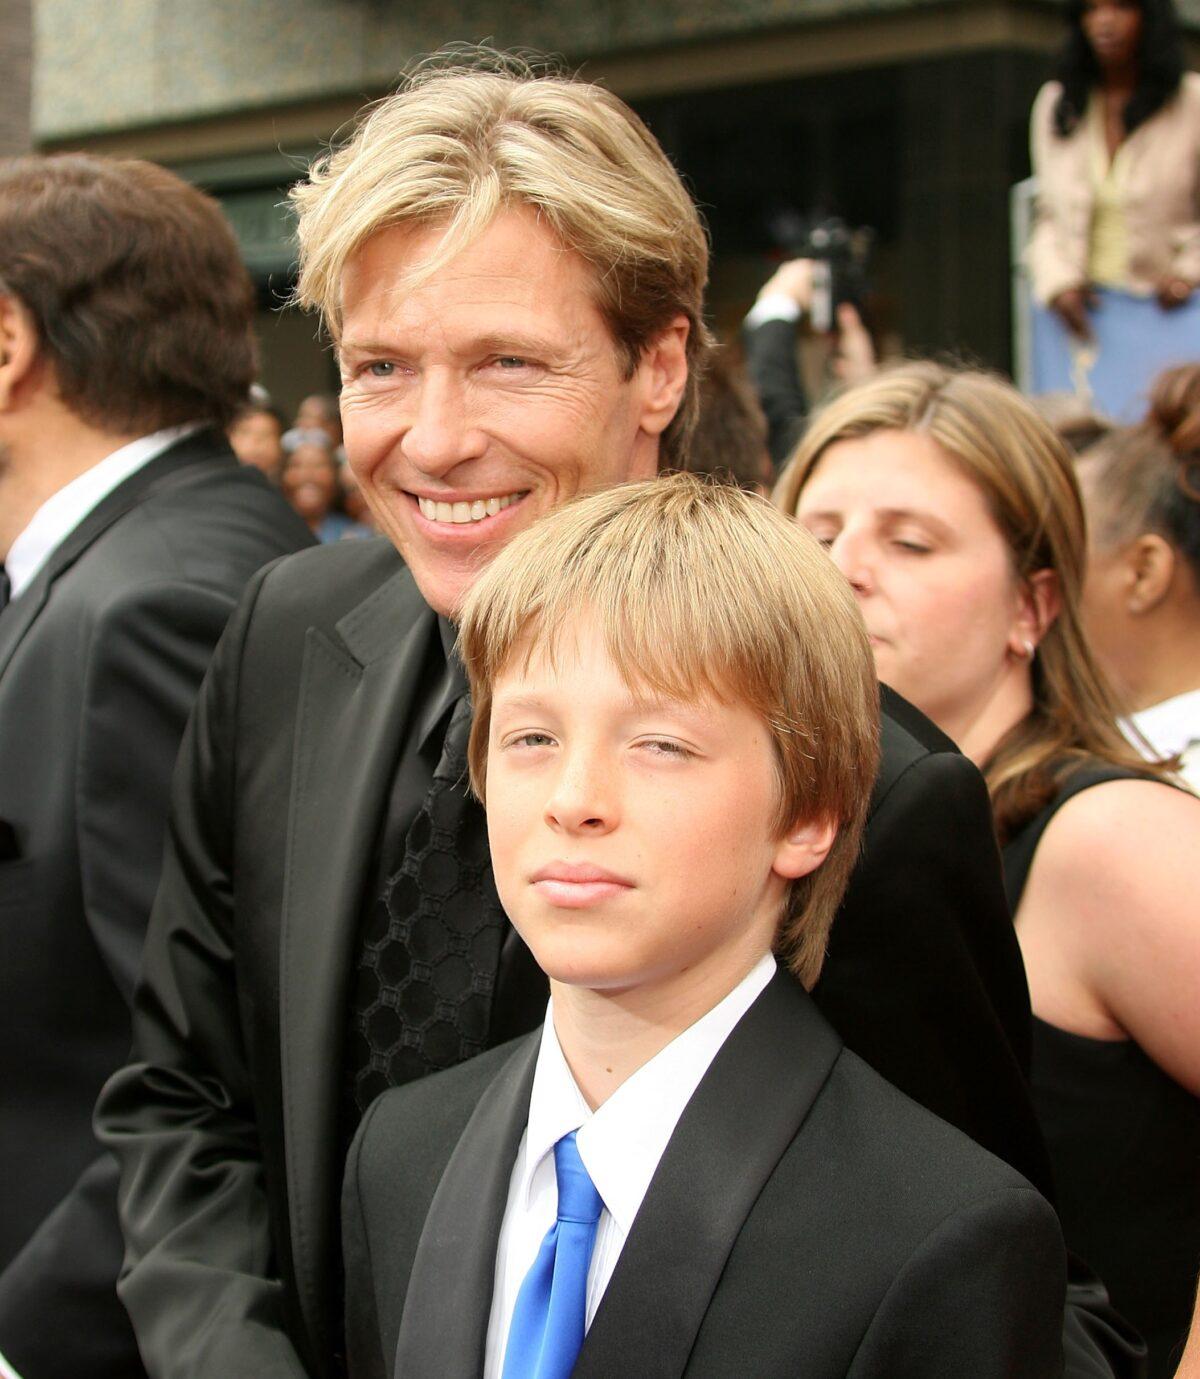 Actor Jack Wagner and his son, Harrison, arrive at the 33rd Annual Daytime Emmy Awards held at the Kodak Theatre in Hollywood, Calif., on April 28, 2006. (Frederick M. Brown/Getty Images)